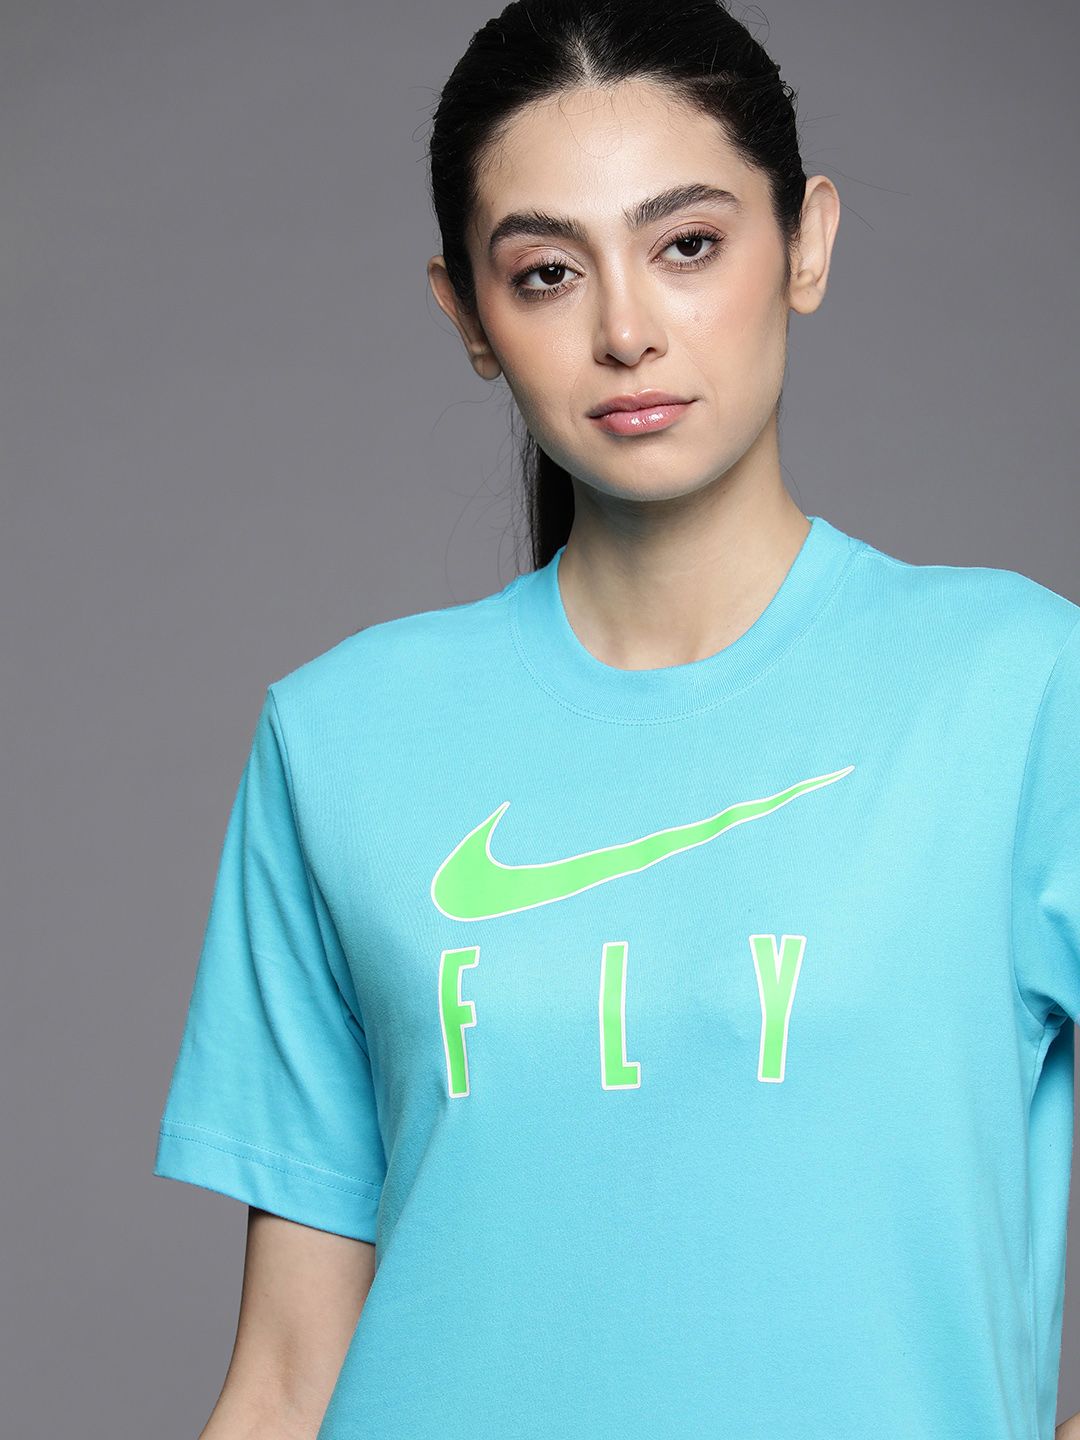 Nike Graphic Printed Dri-FIT Swoosh Fly Boxy Top Price in India